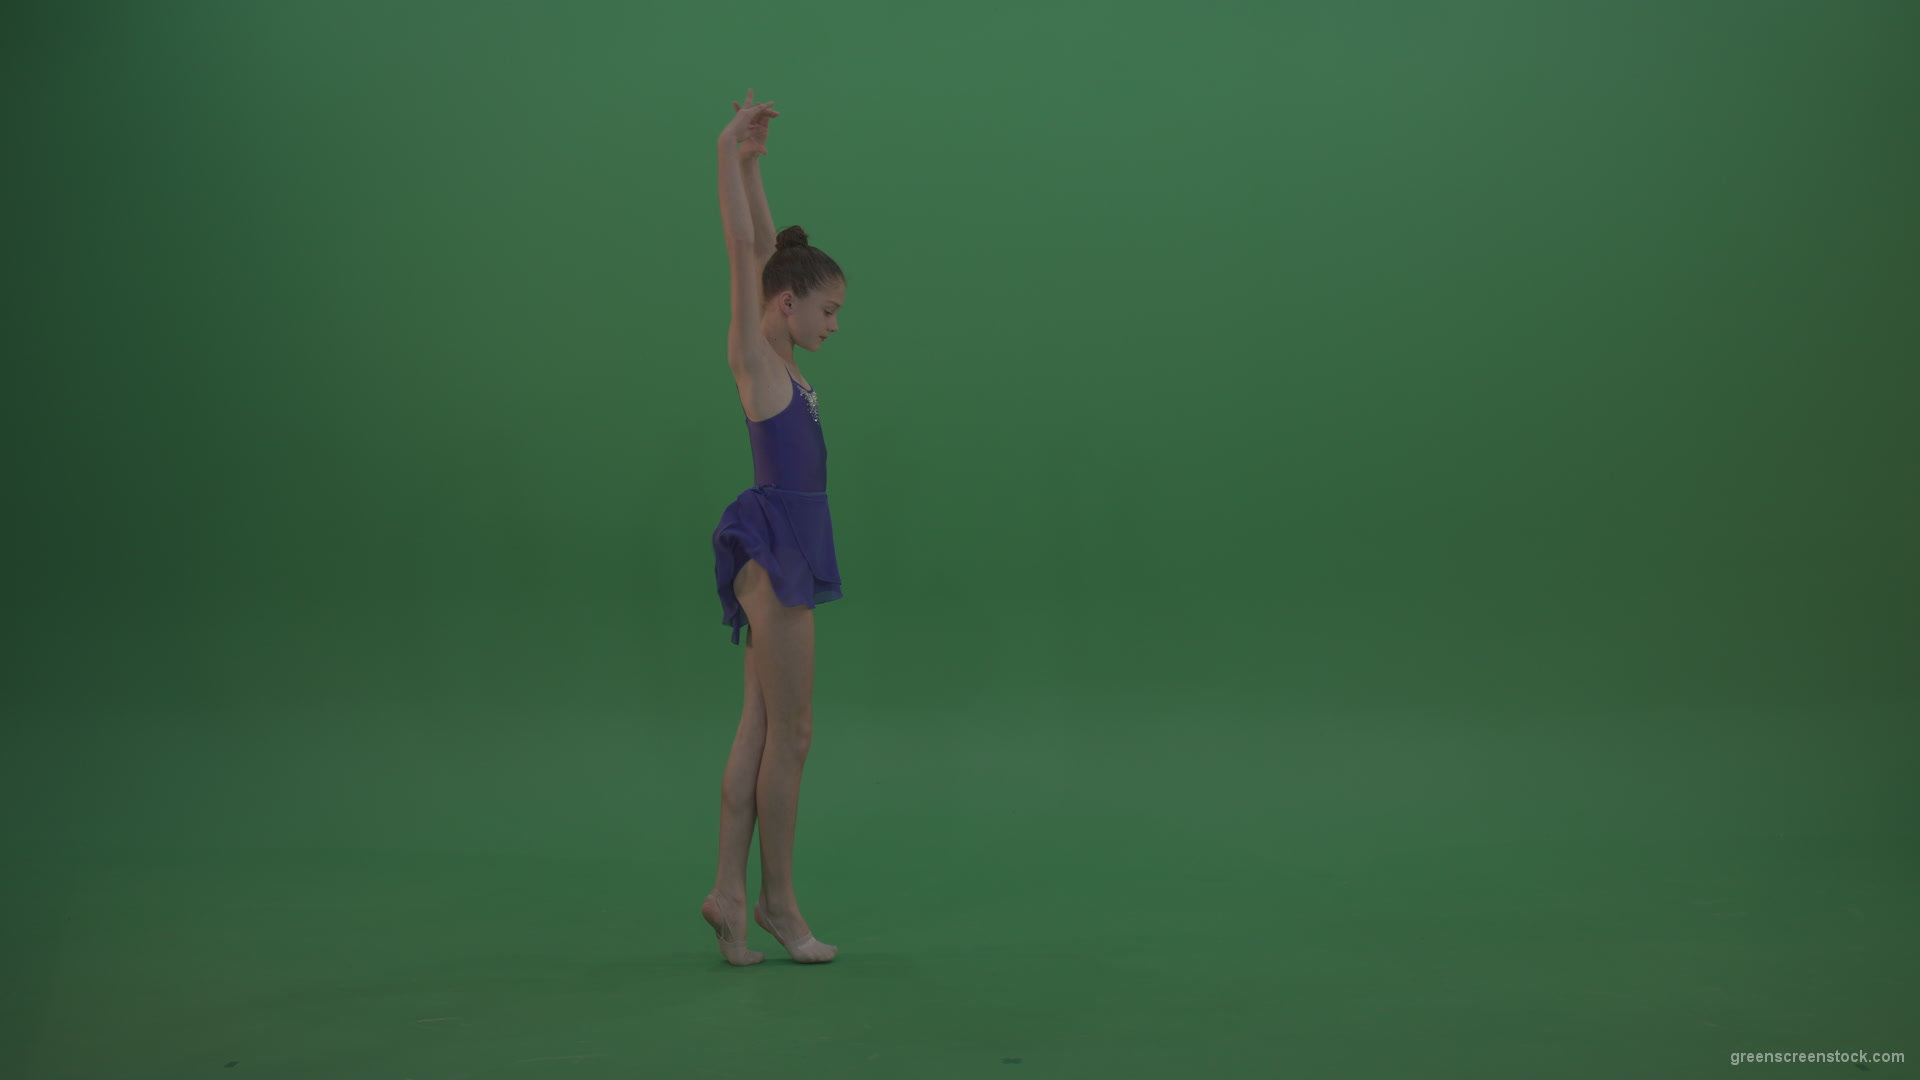 Cute_Athletic_Gymnast_Performing_Awesome_Split_Technique_Spin_Combination_With_Back_Handspring_On_Green_Screen_Chroma_Key_Wall_Background_009 Green Screen Stock